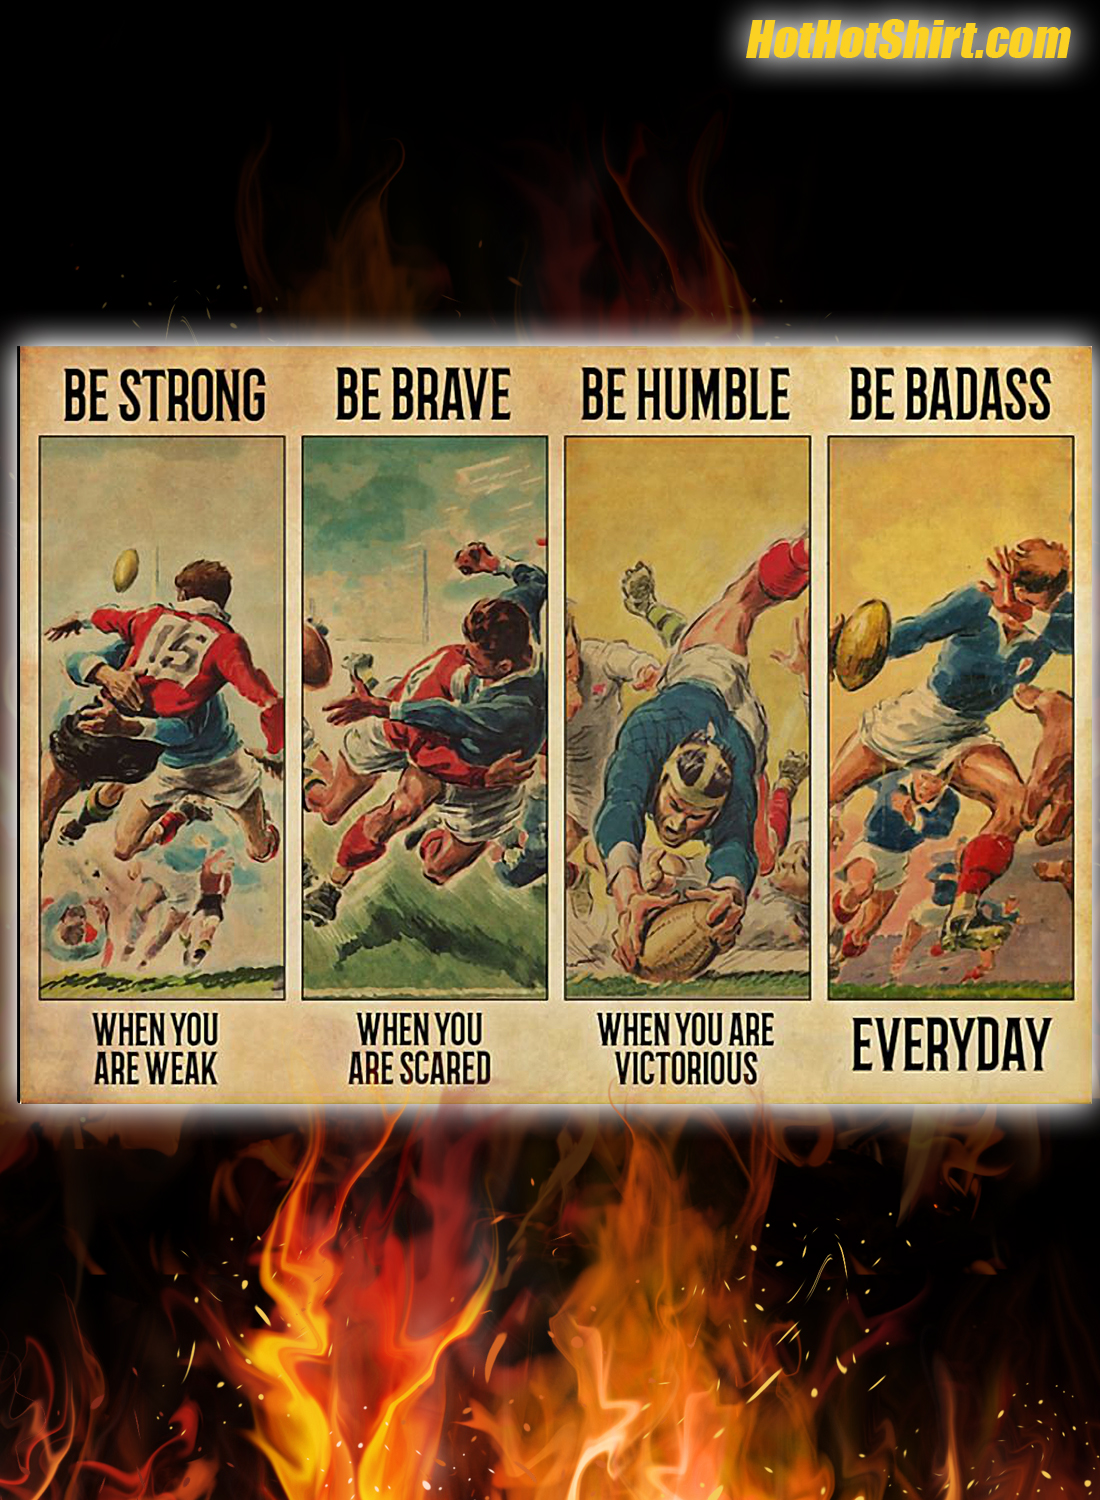 Rugby be strong be brave be humble be badass poster 1